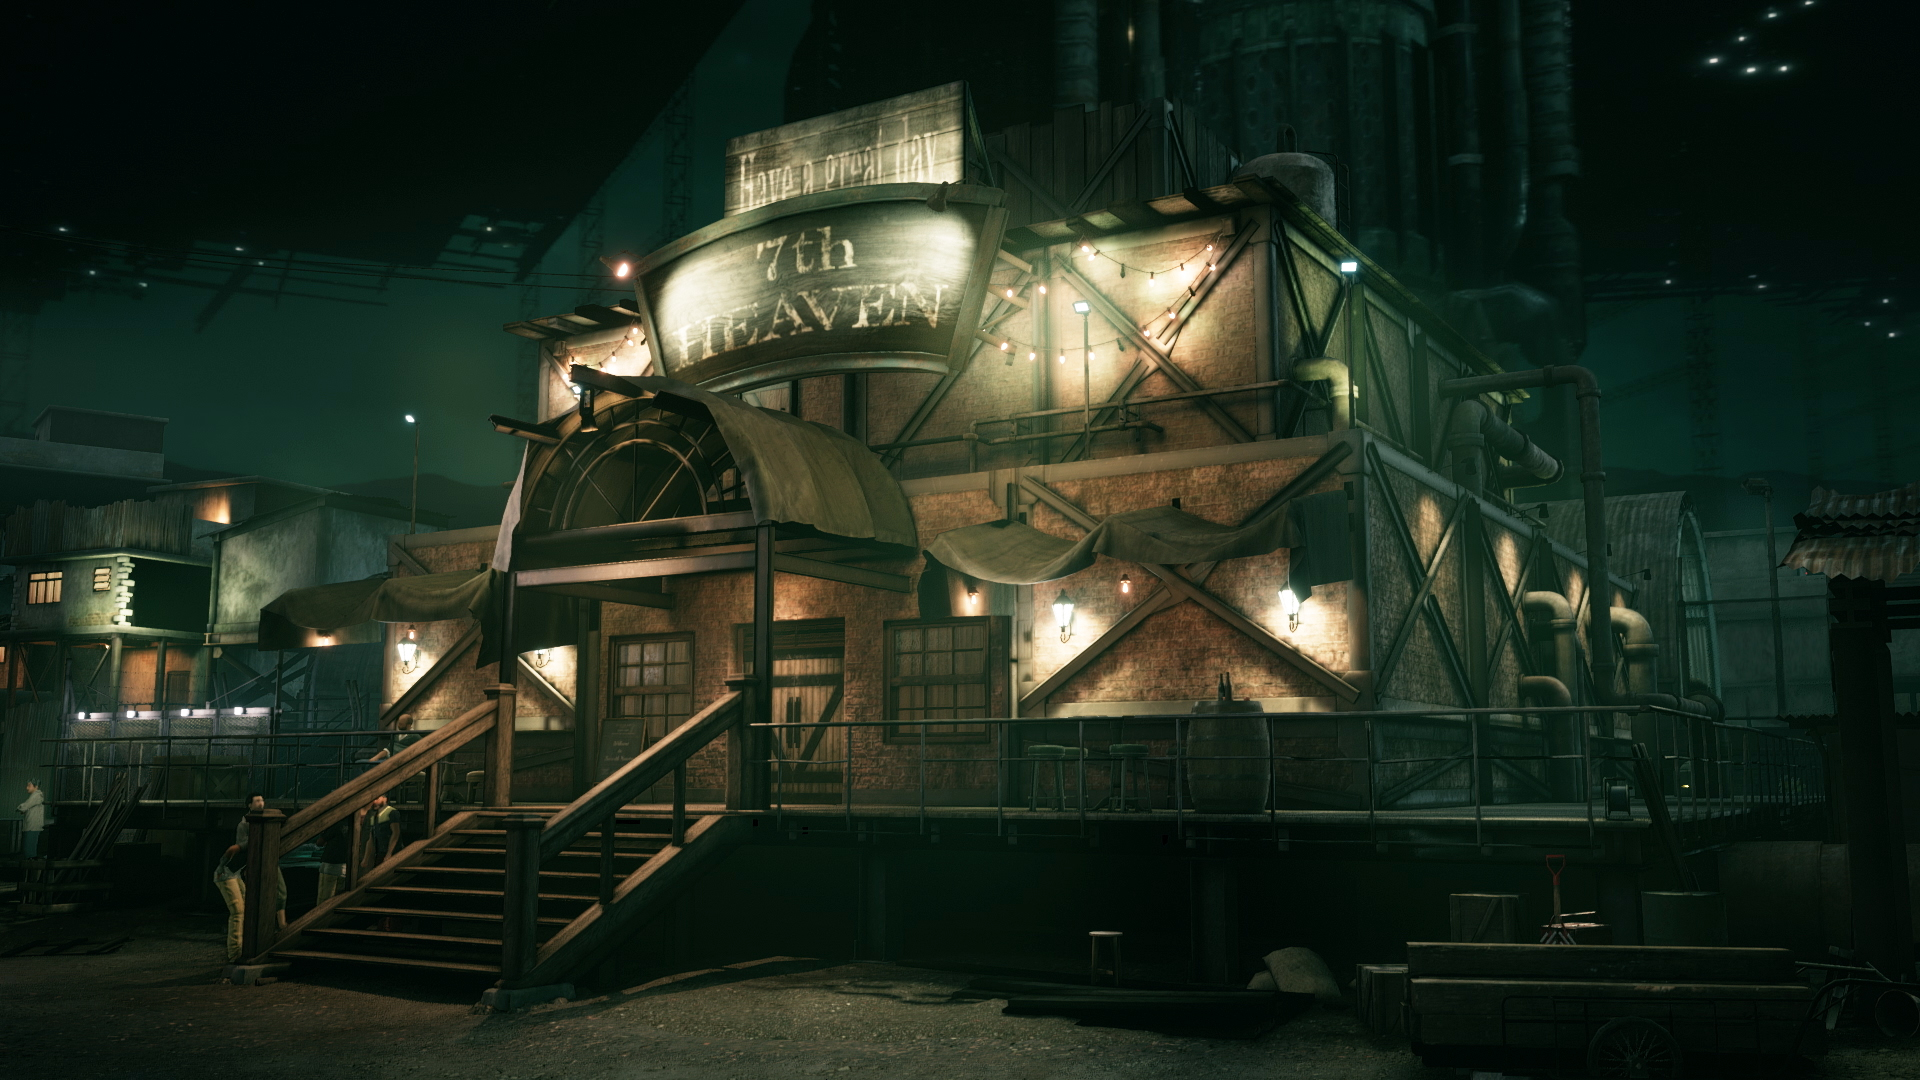 Free FINAL FANTASY VII REMAKE Zoom backgrounds available to download |  Square Enix Blog